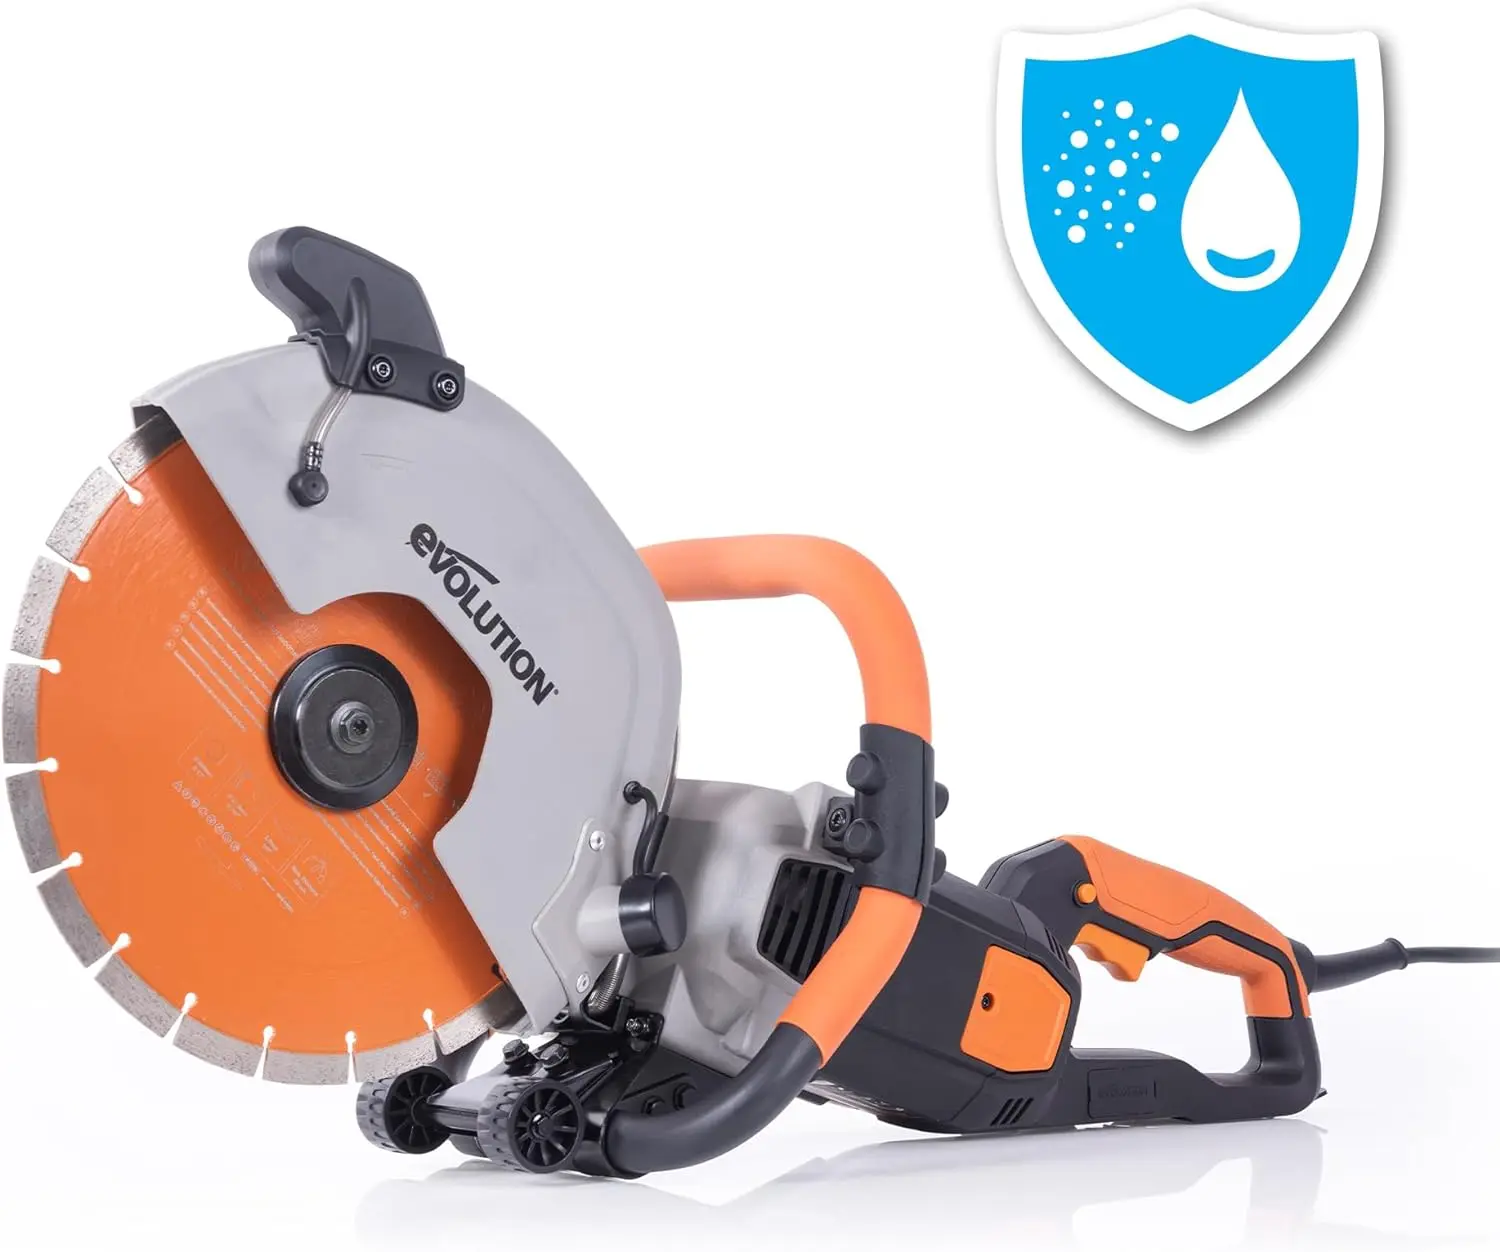 

Evolution R300DCT+ 12 Inch Concrete Saw with Water Fed Dust Suppression (Aka Circular Saw, Angle Grinder, Cut Off Saw, Demo